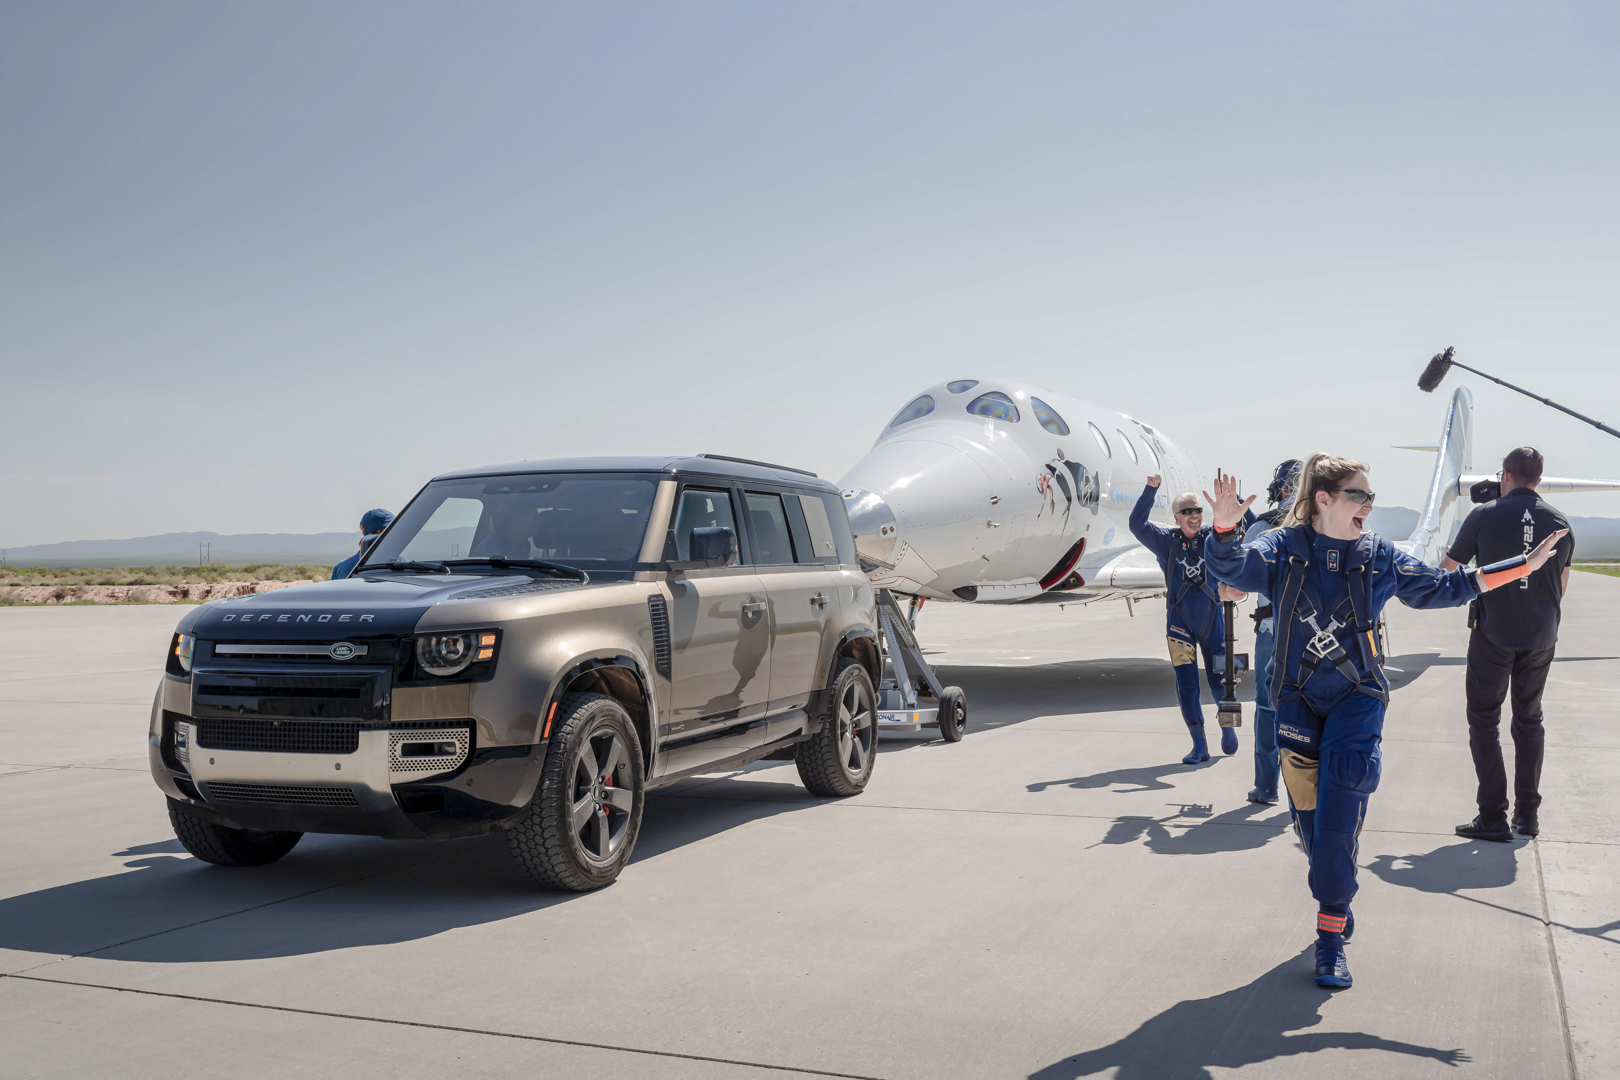 Land Rover vehicles support Virgin Galactic’s first commercial space flight with a full crew